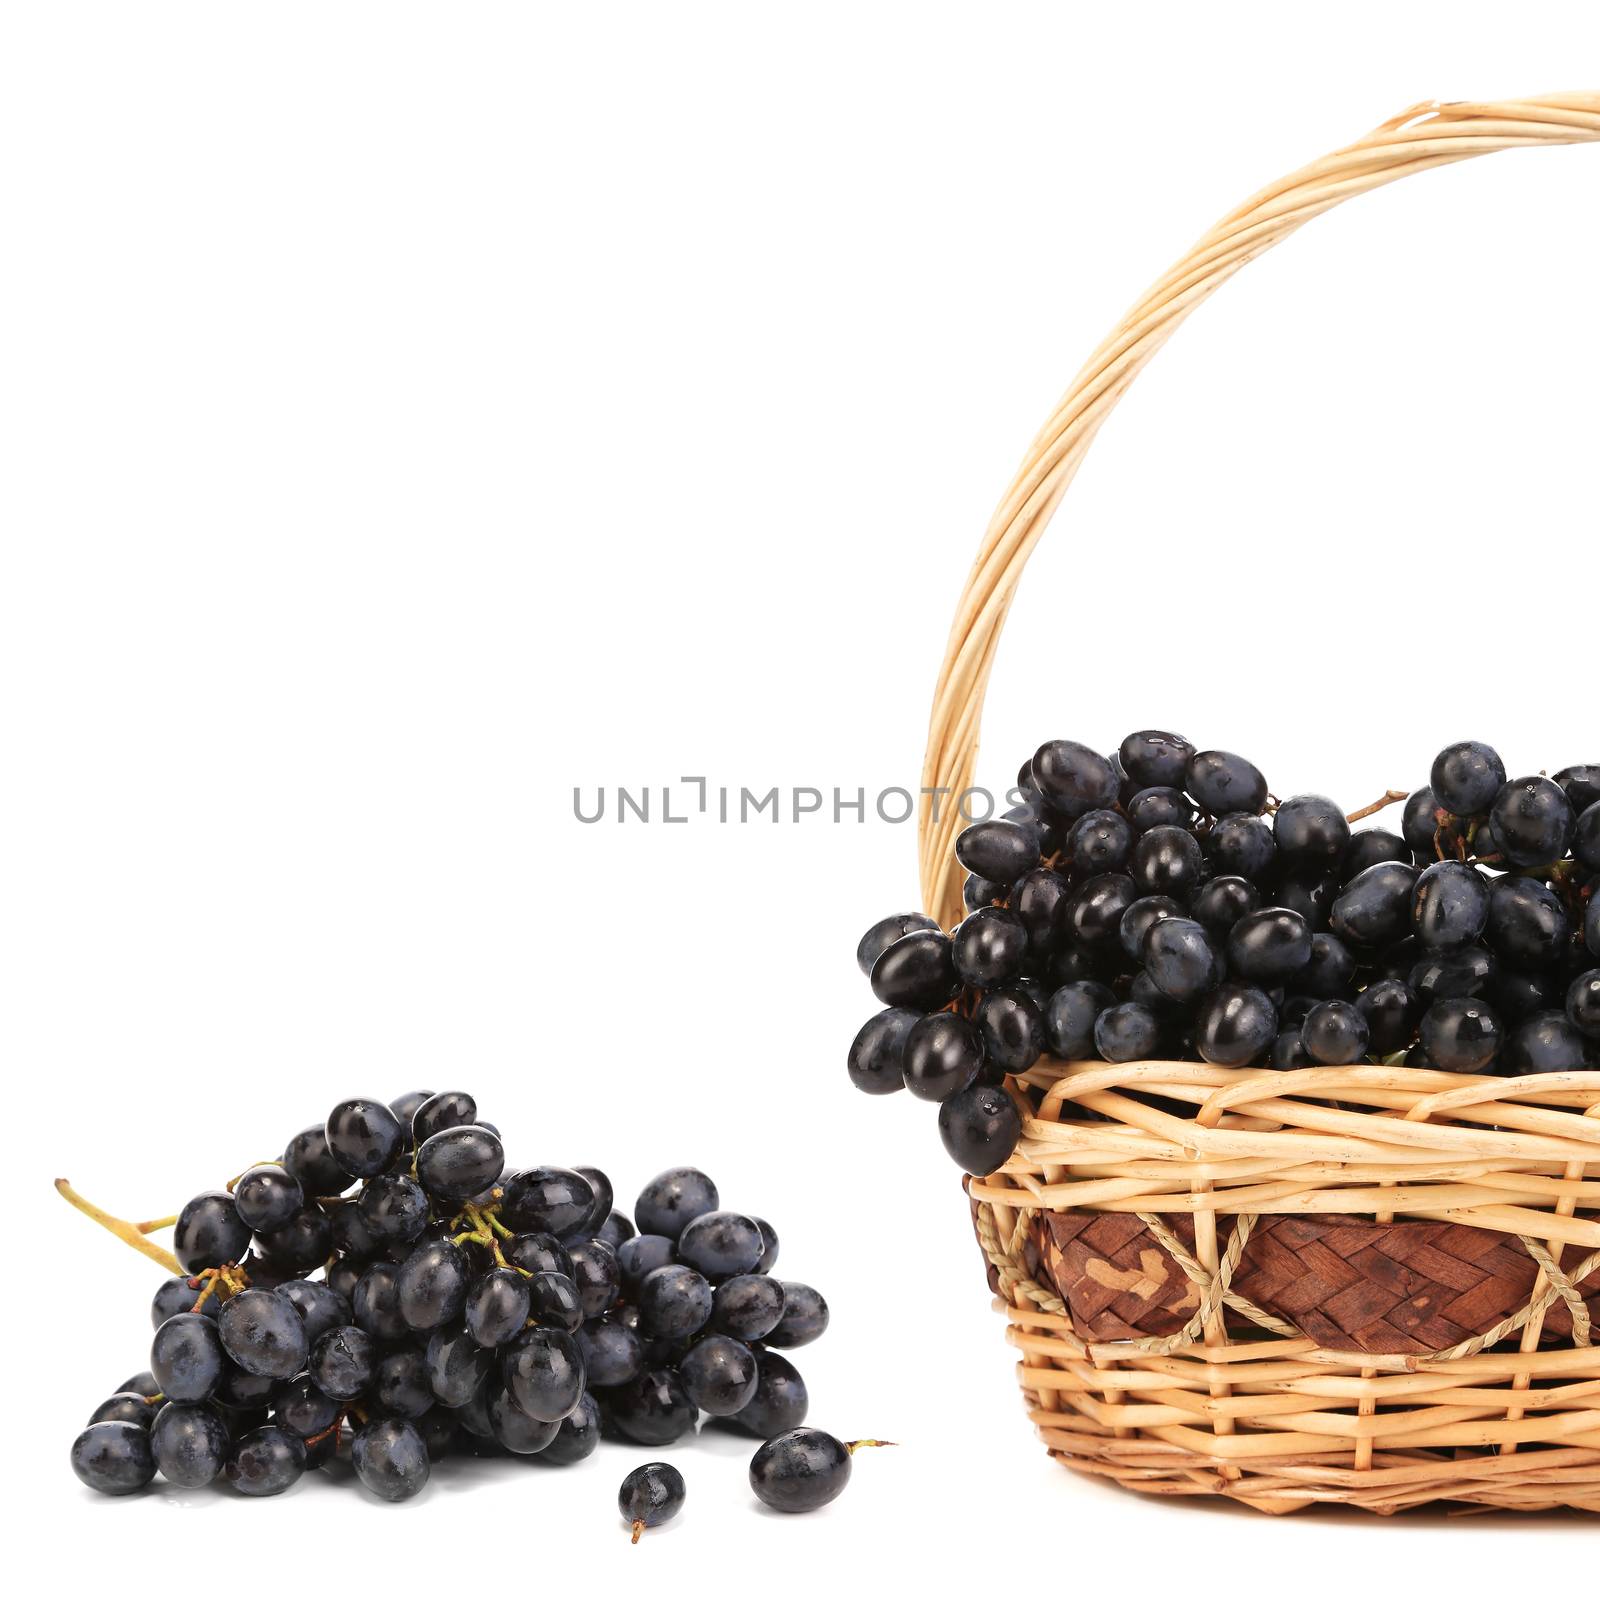 Dark grapes in a wicker basket. Whole background.